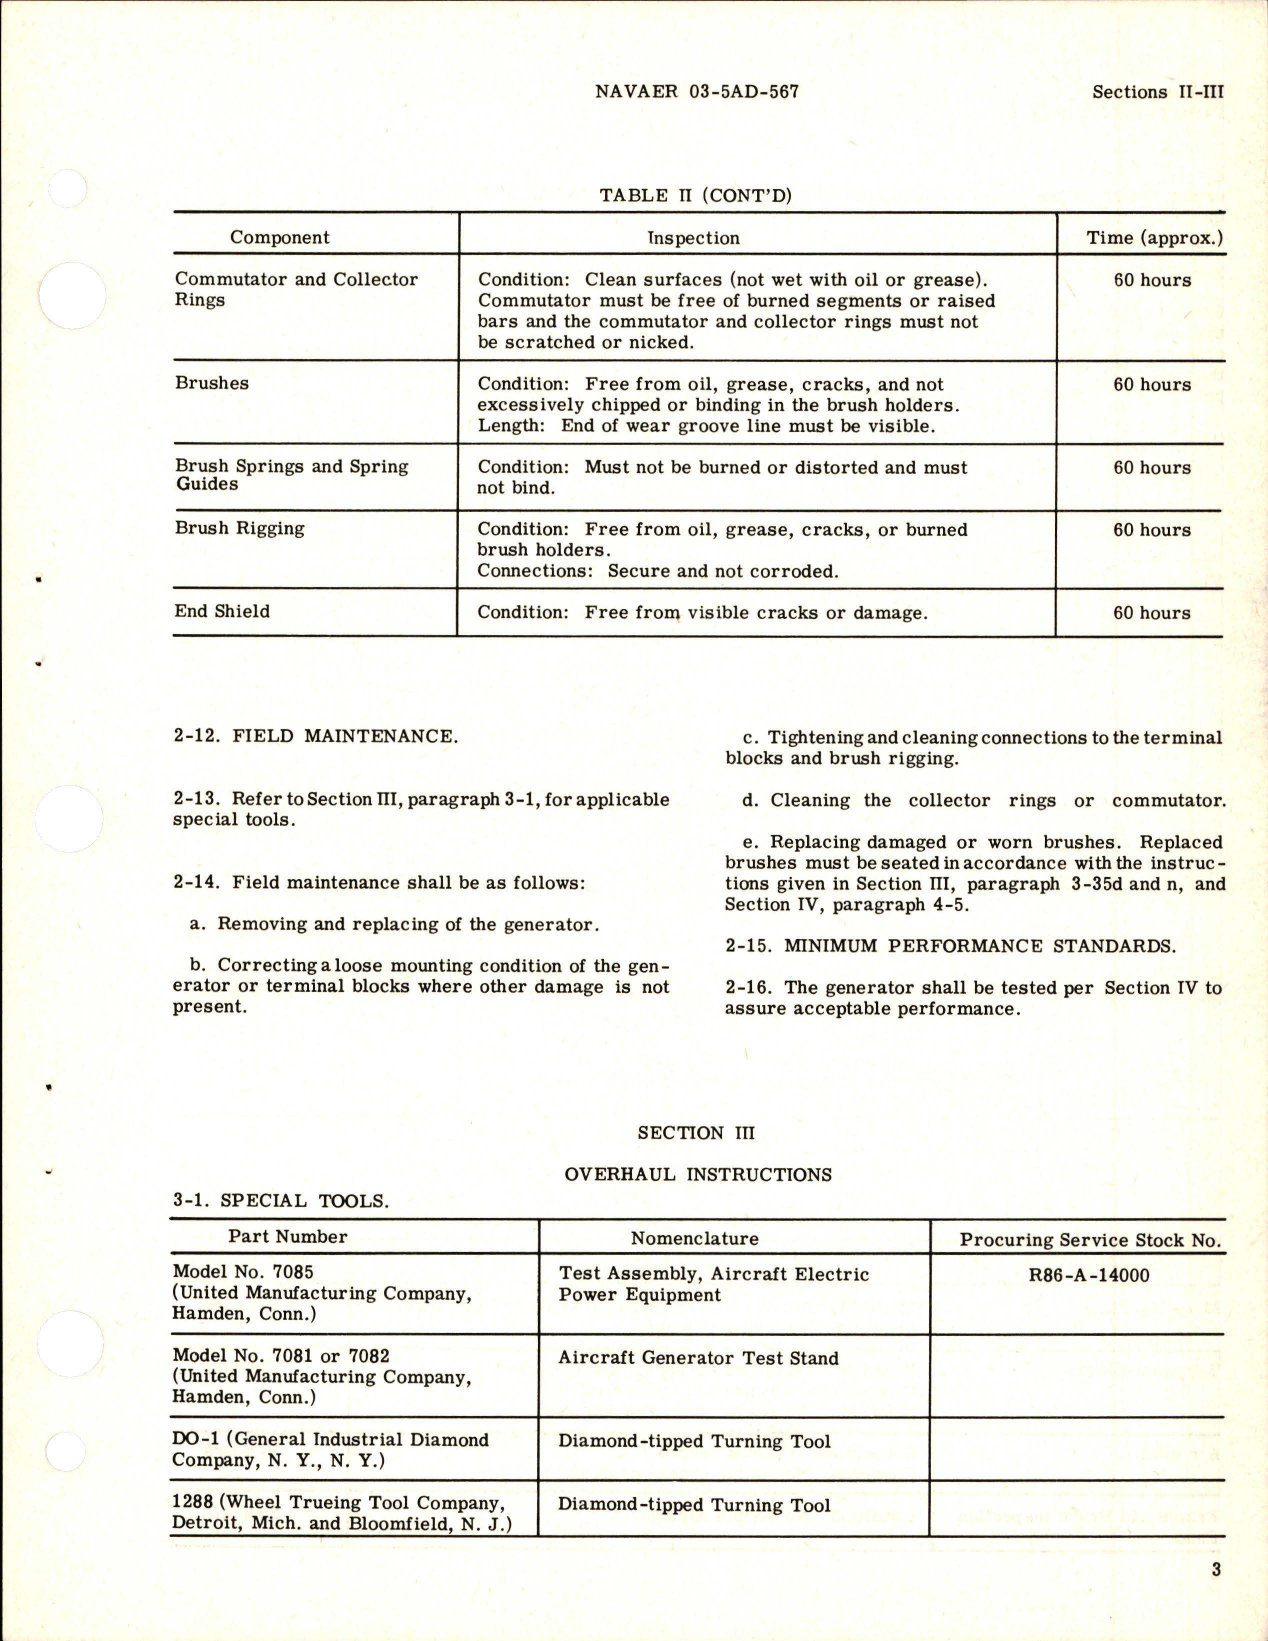 Sample page 7 from AirCorps Library document: Overhaul and Service Instructions for AC Generators 